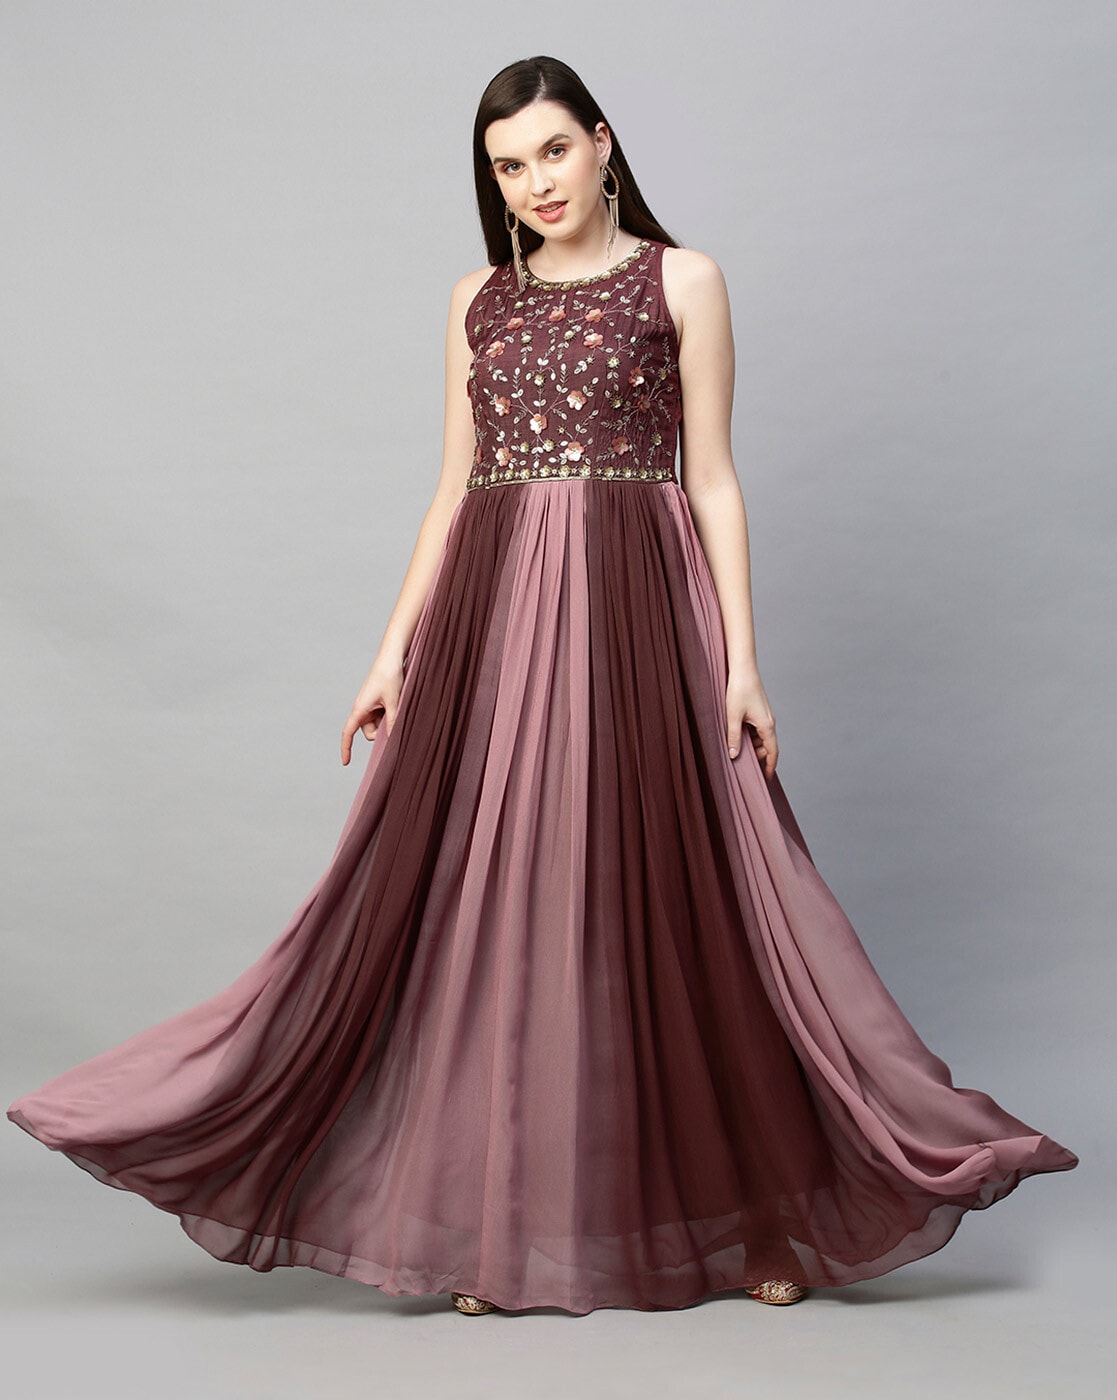 Buy Maroon Dresses for Women by Mish Online | Ajio.com